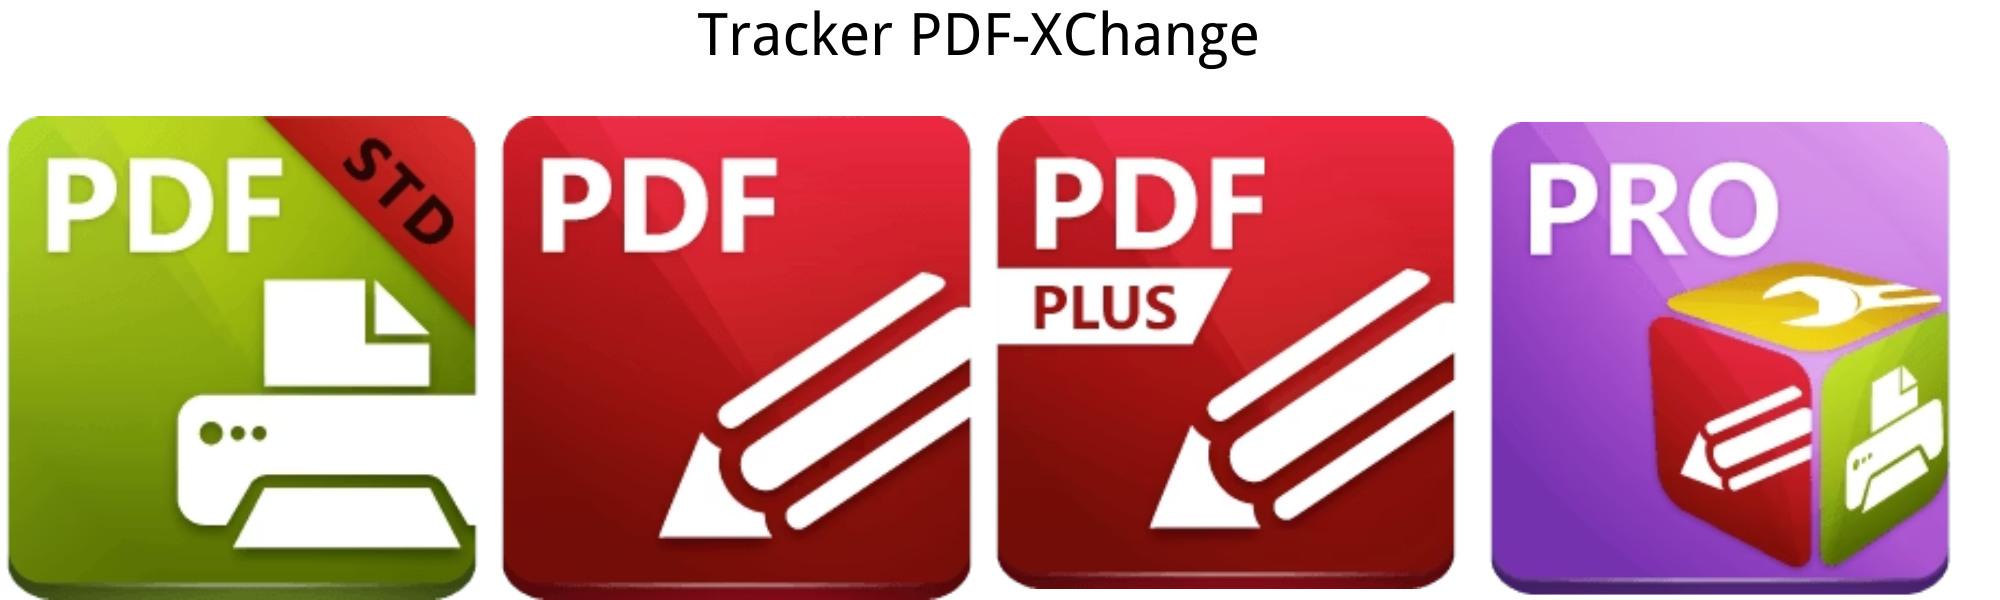 Tracker PDF-XChange: Accurate and efficient PDF solution